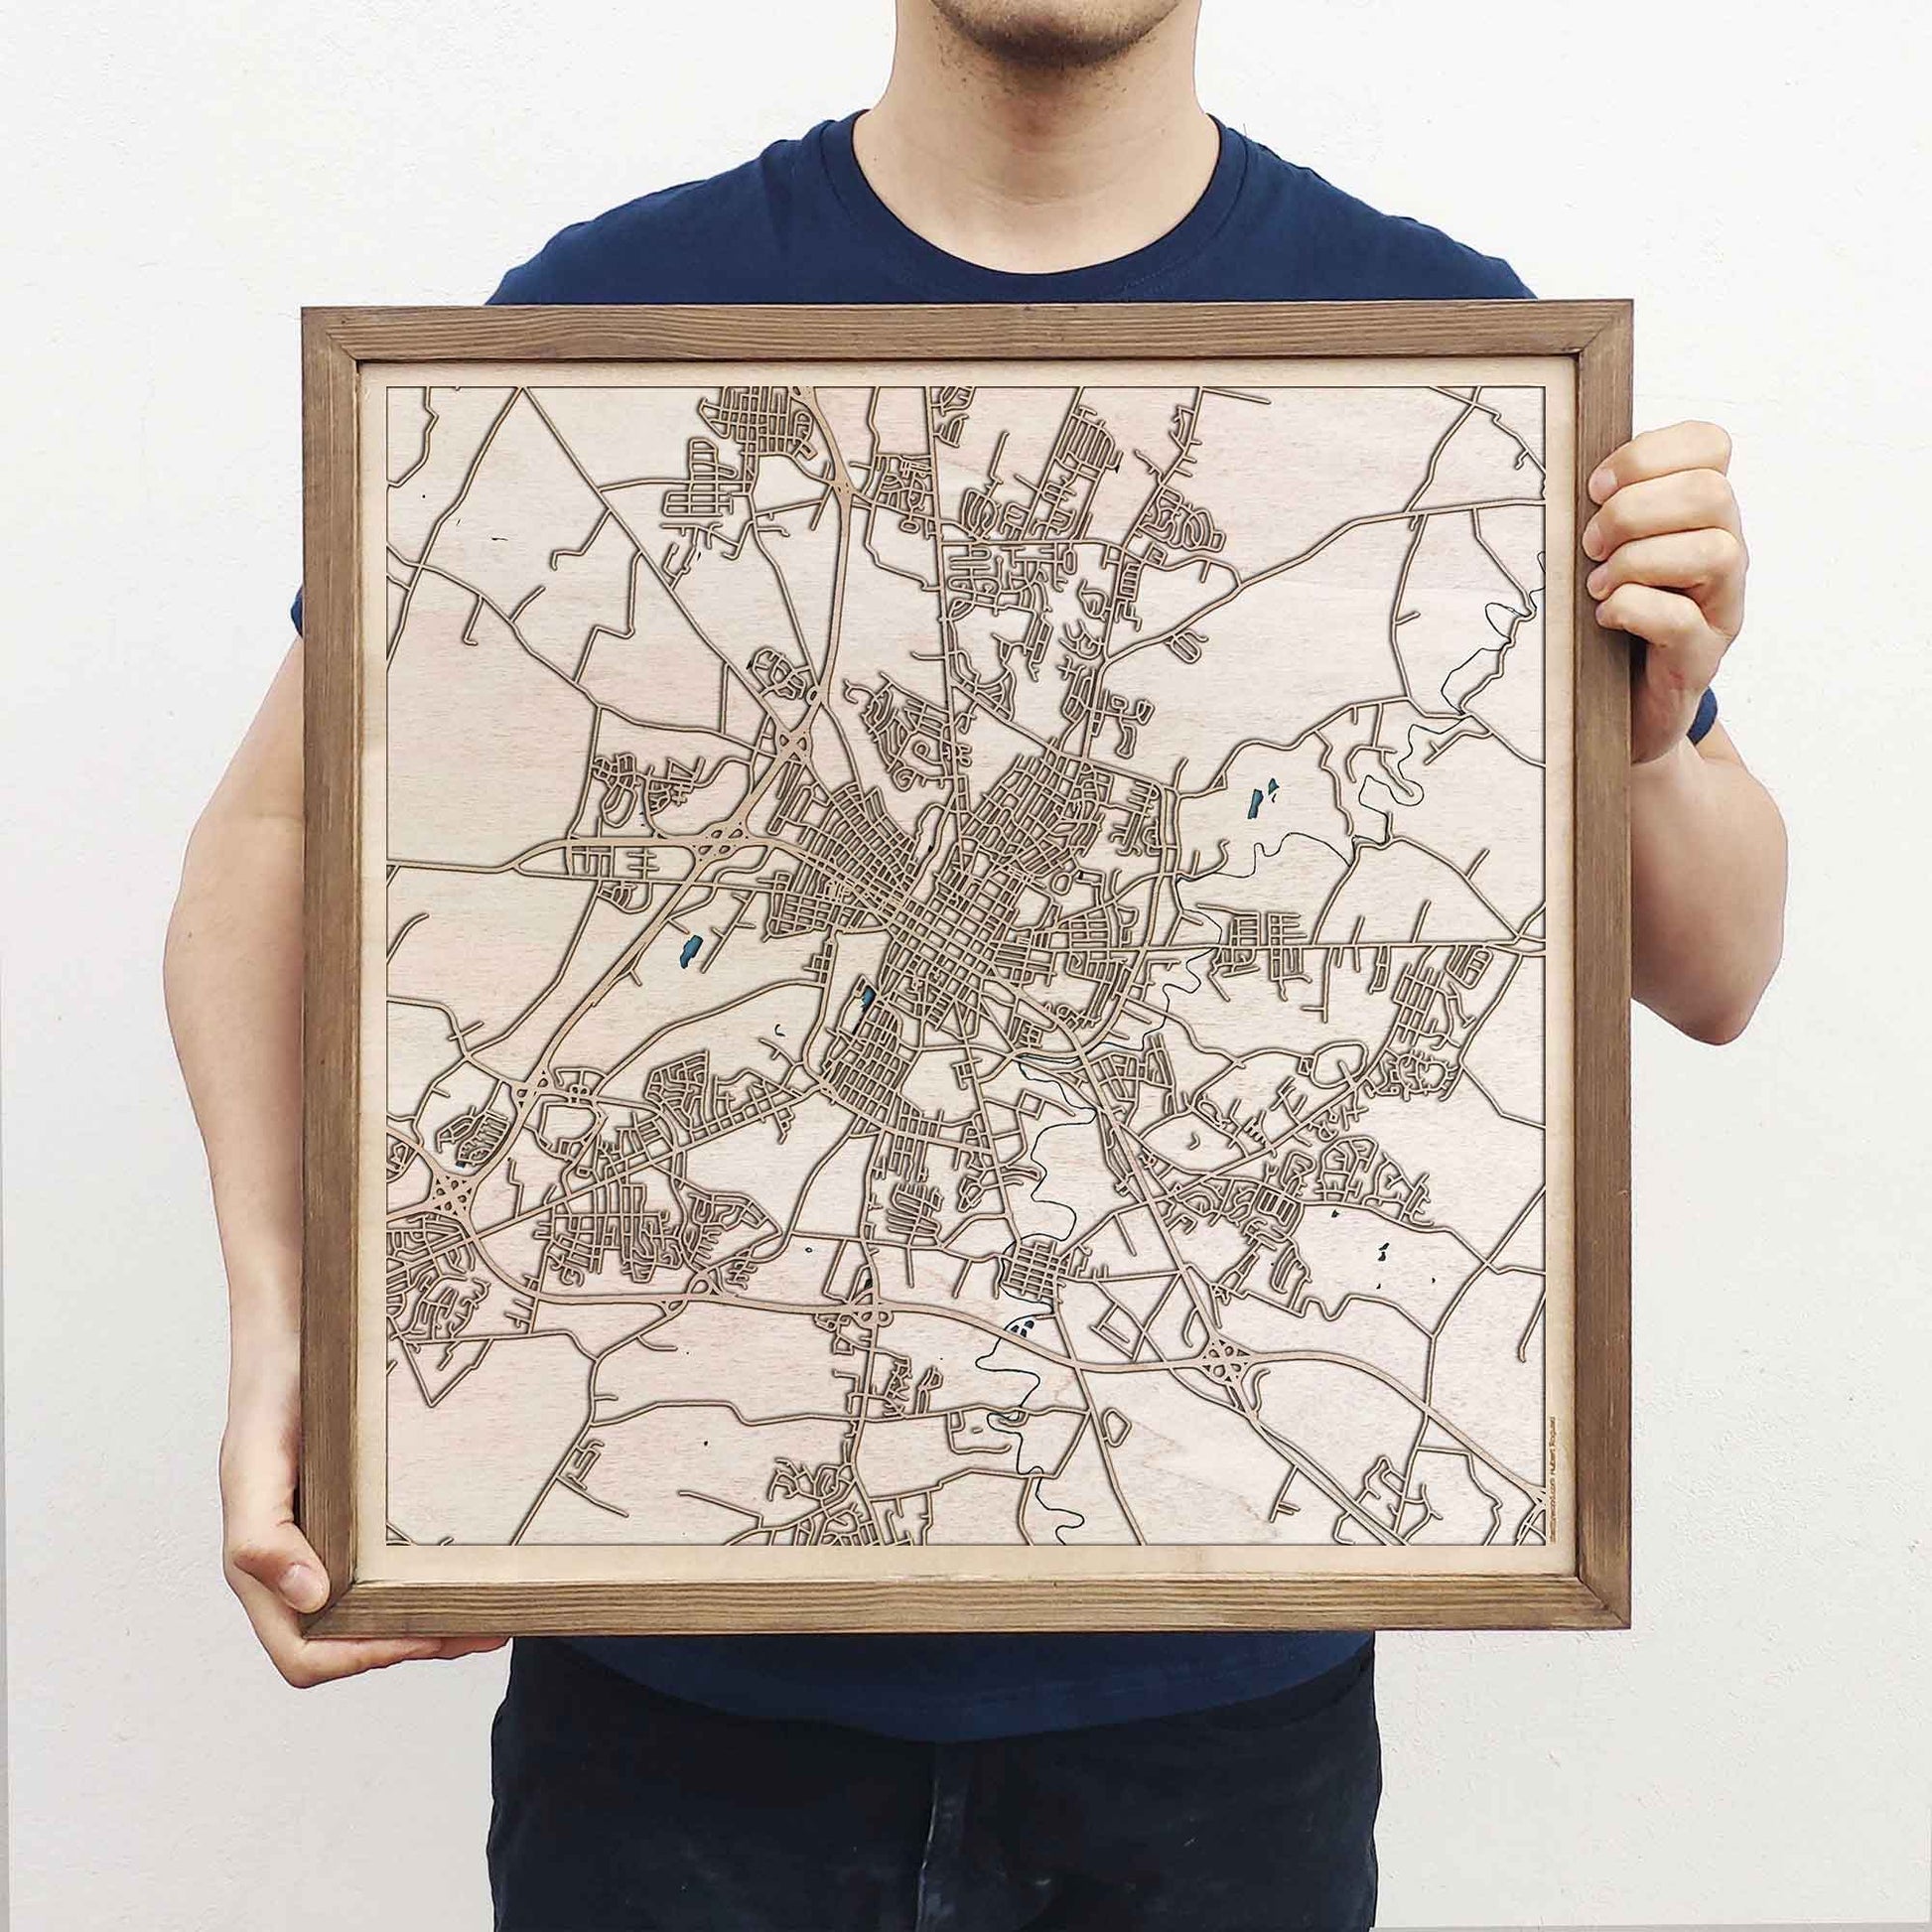 Hagerstown Wooden Map by CityWood - Custom Wood Map Art - Unique Laser Cut Engraved - Anniversary Gift